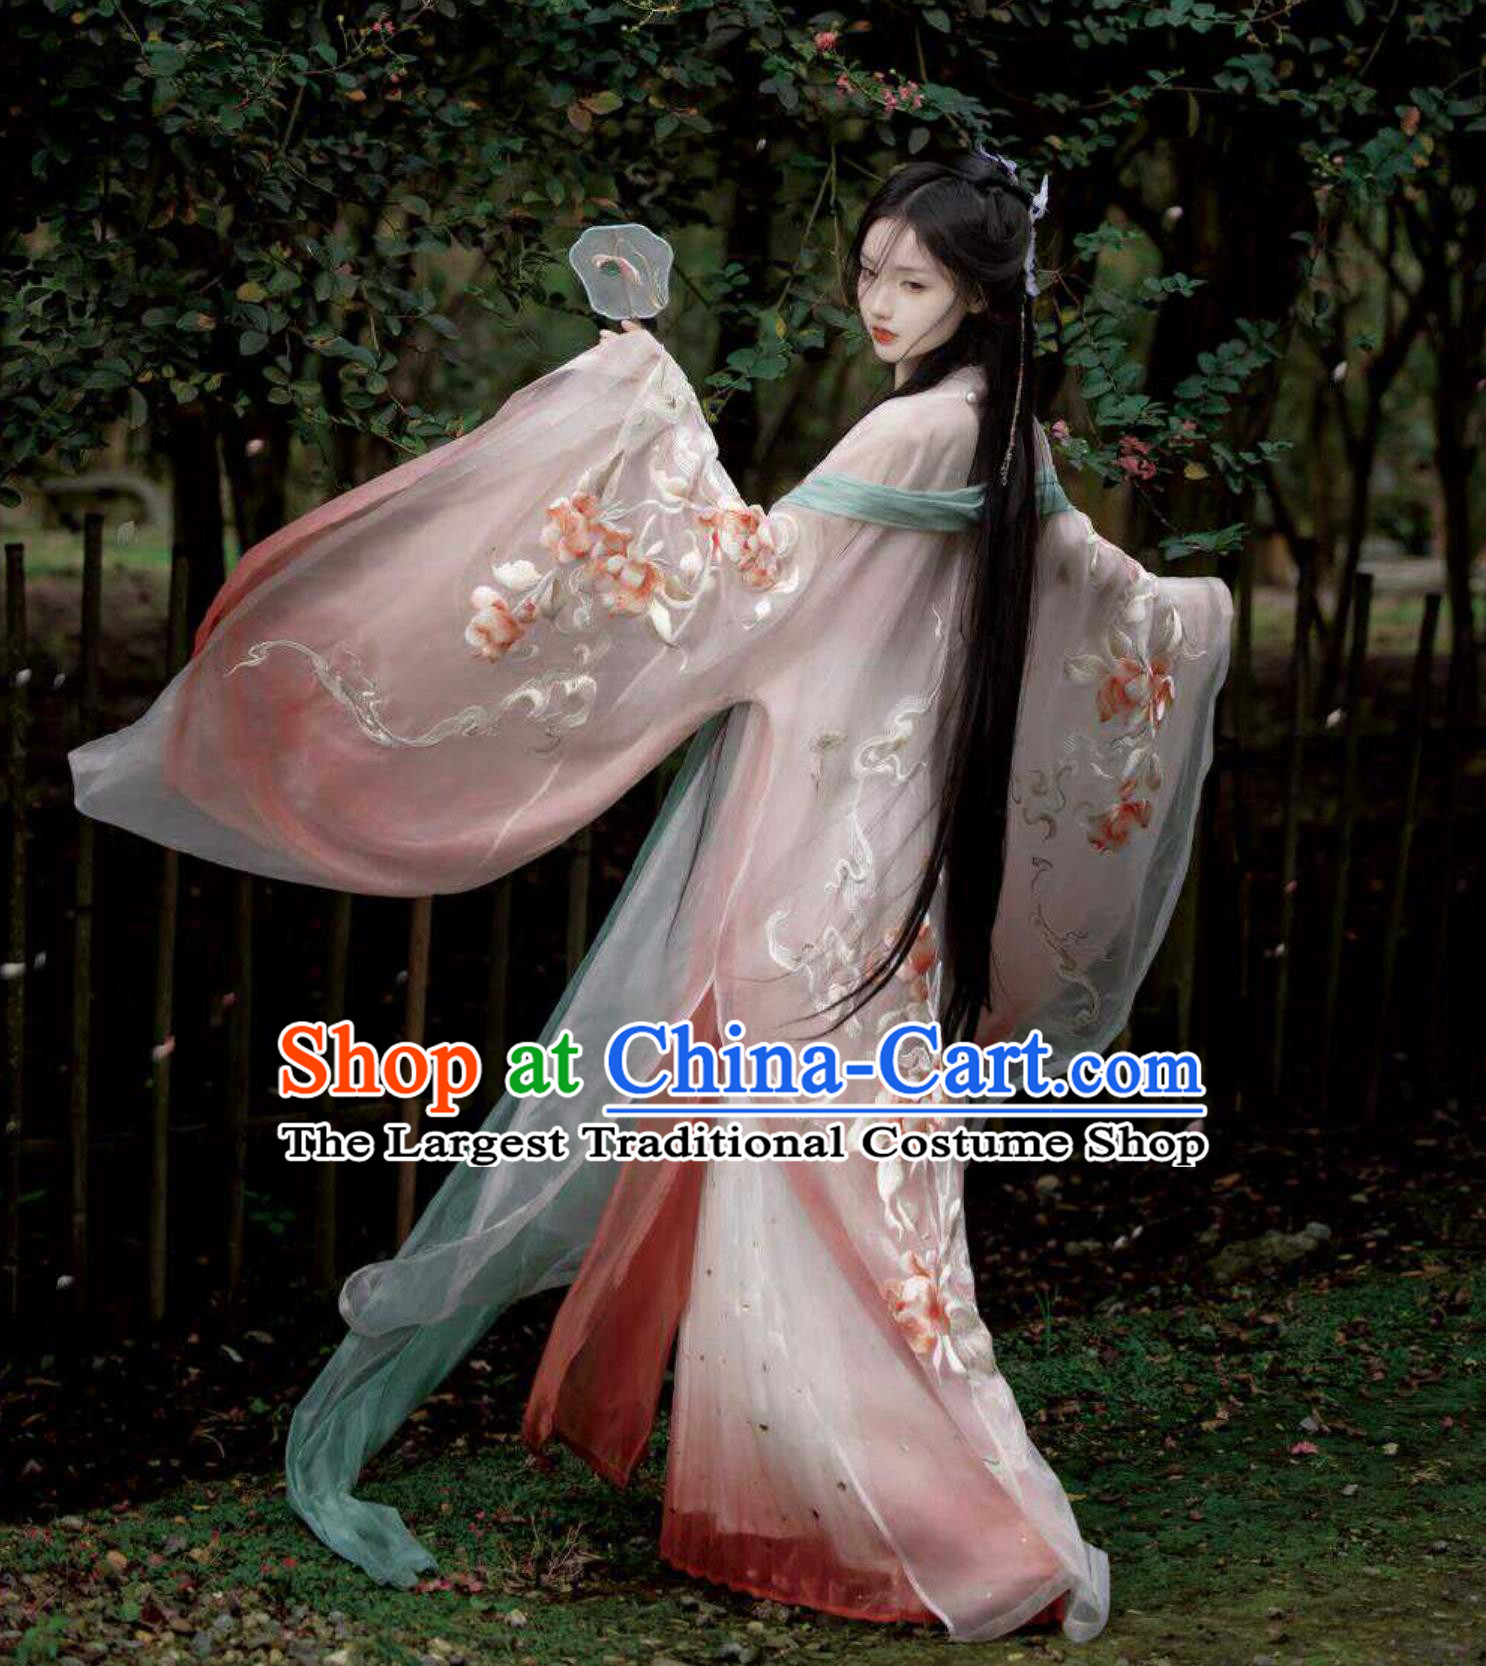 Online Buy Embroidered Hezi Qun Ancient Chinese Female Costumes China Tang Dynasty Princess Hanfu Clothing